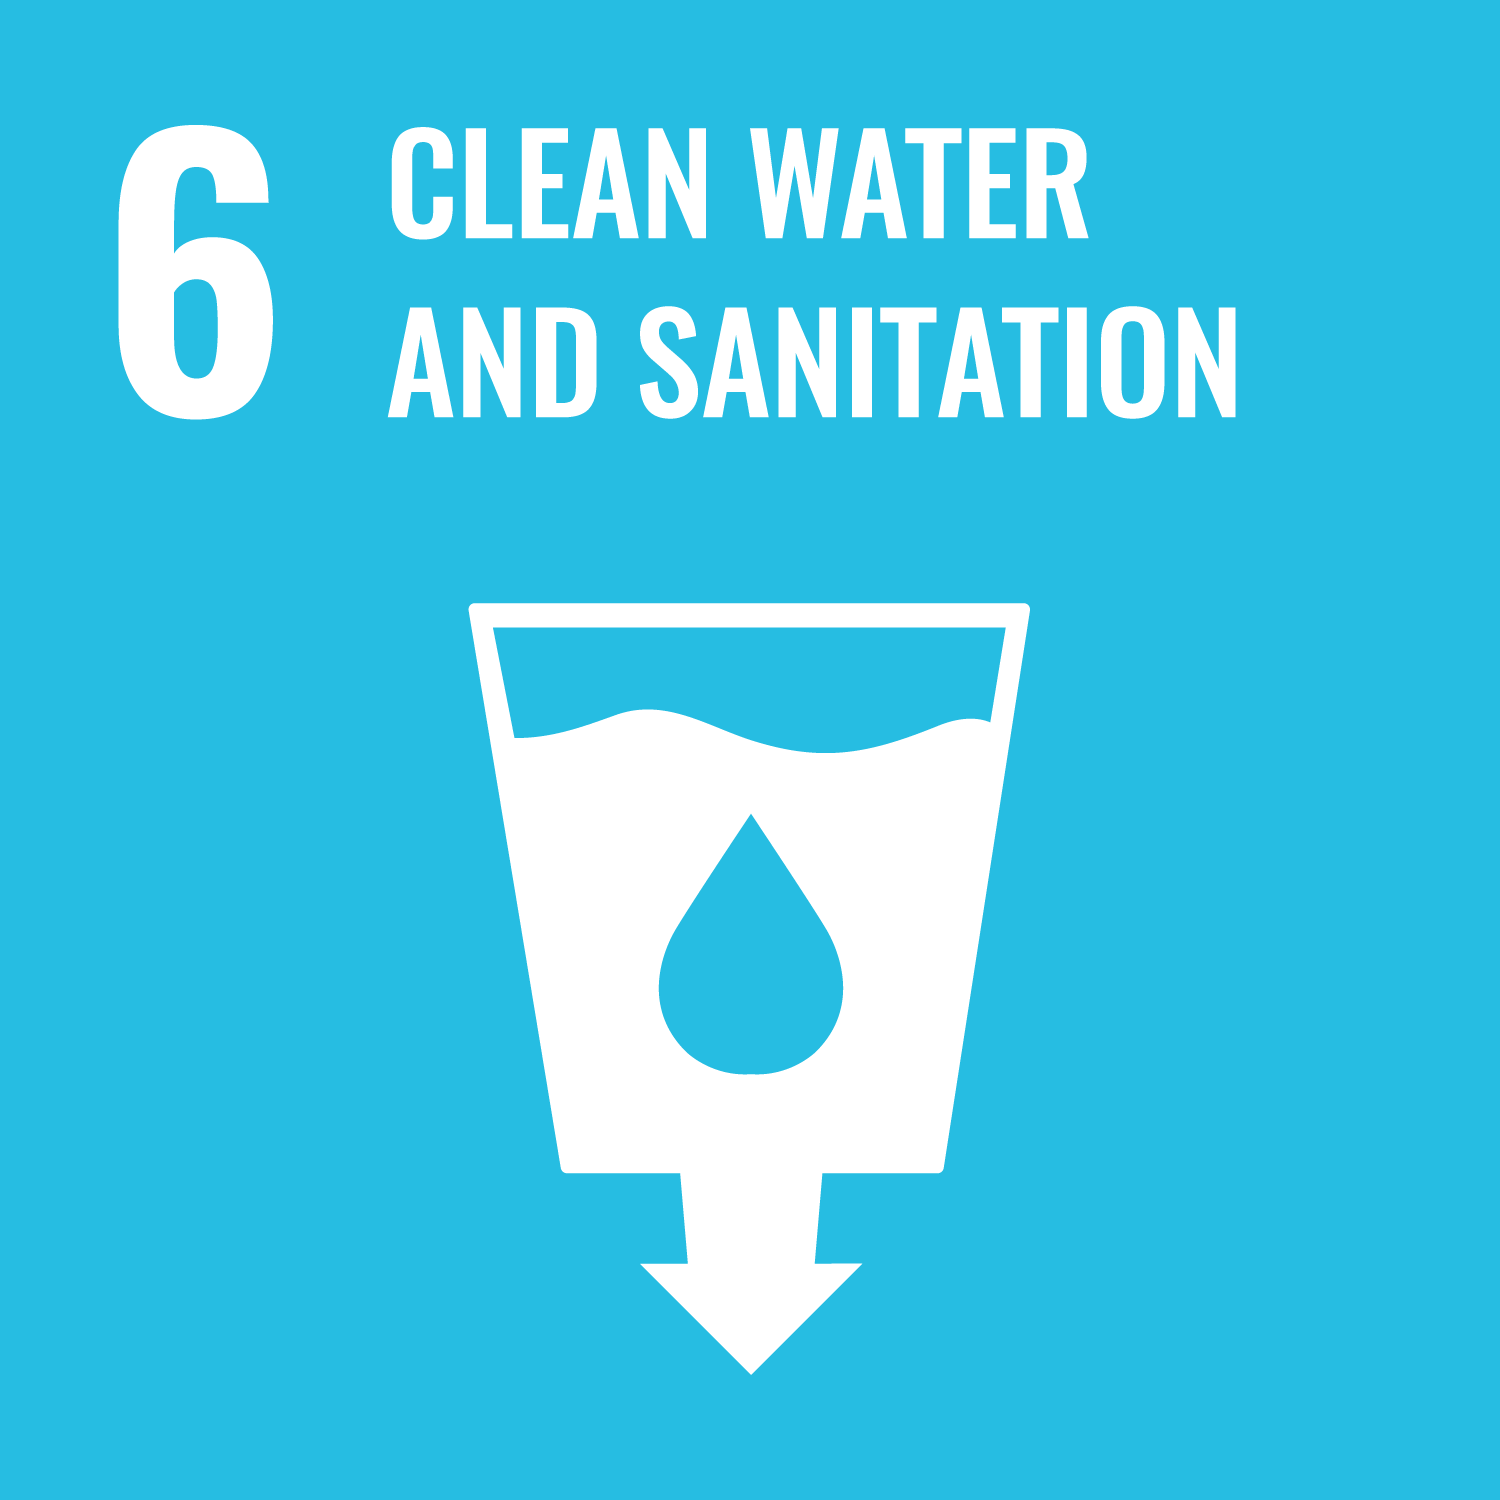 United Nation's 17 Sustainable Development Goals goal number 6